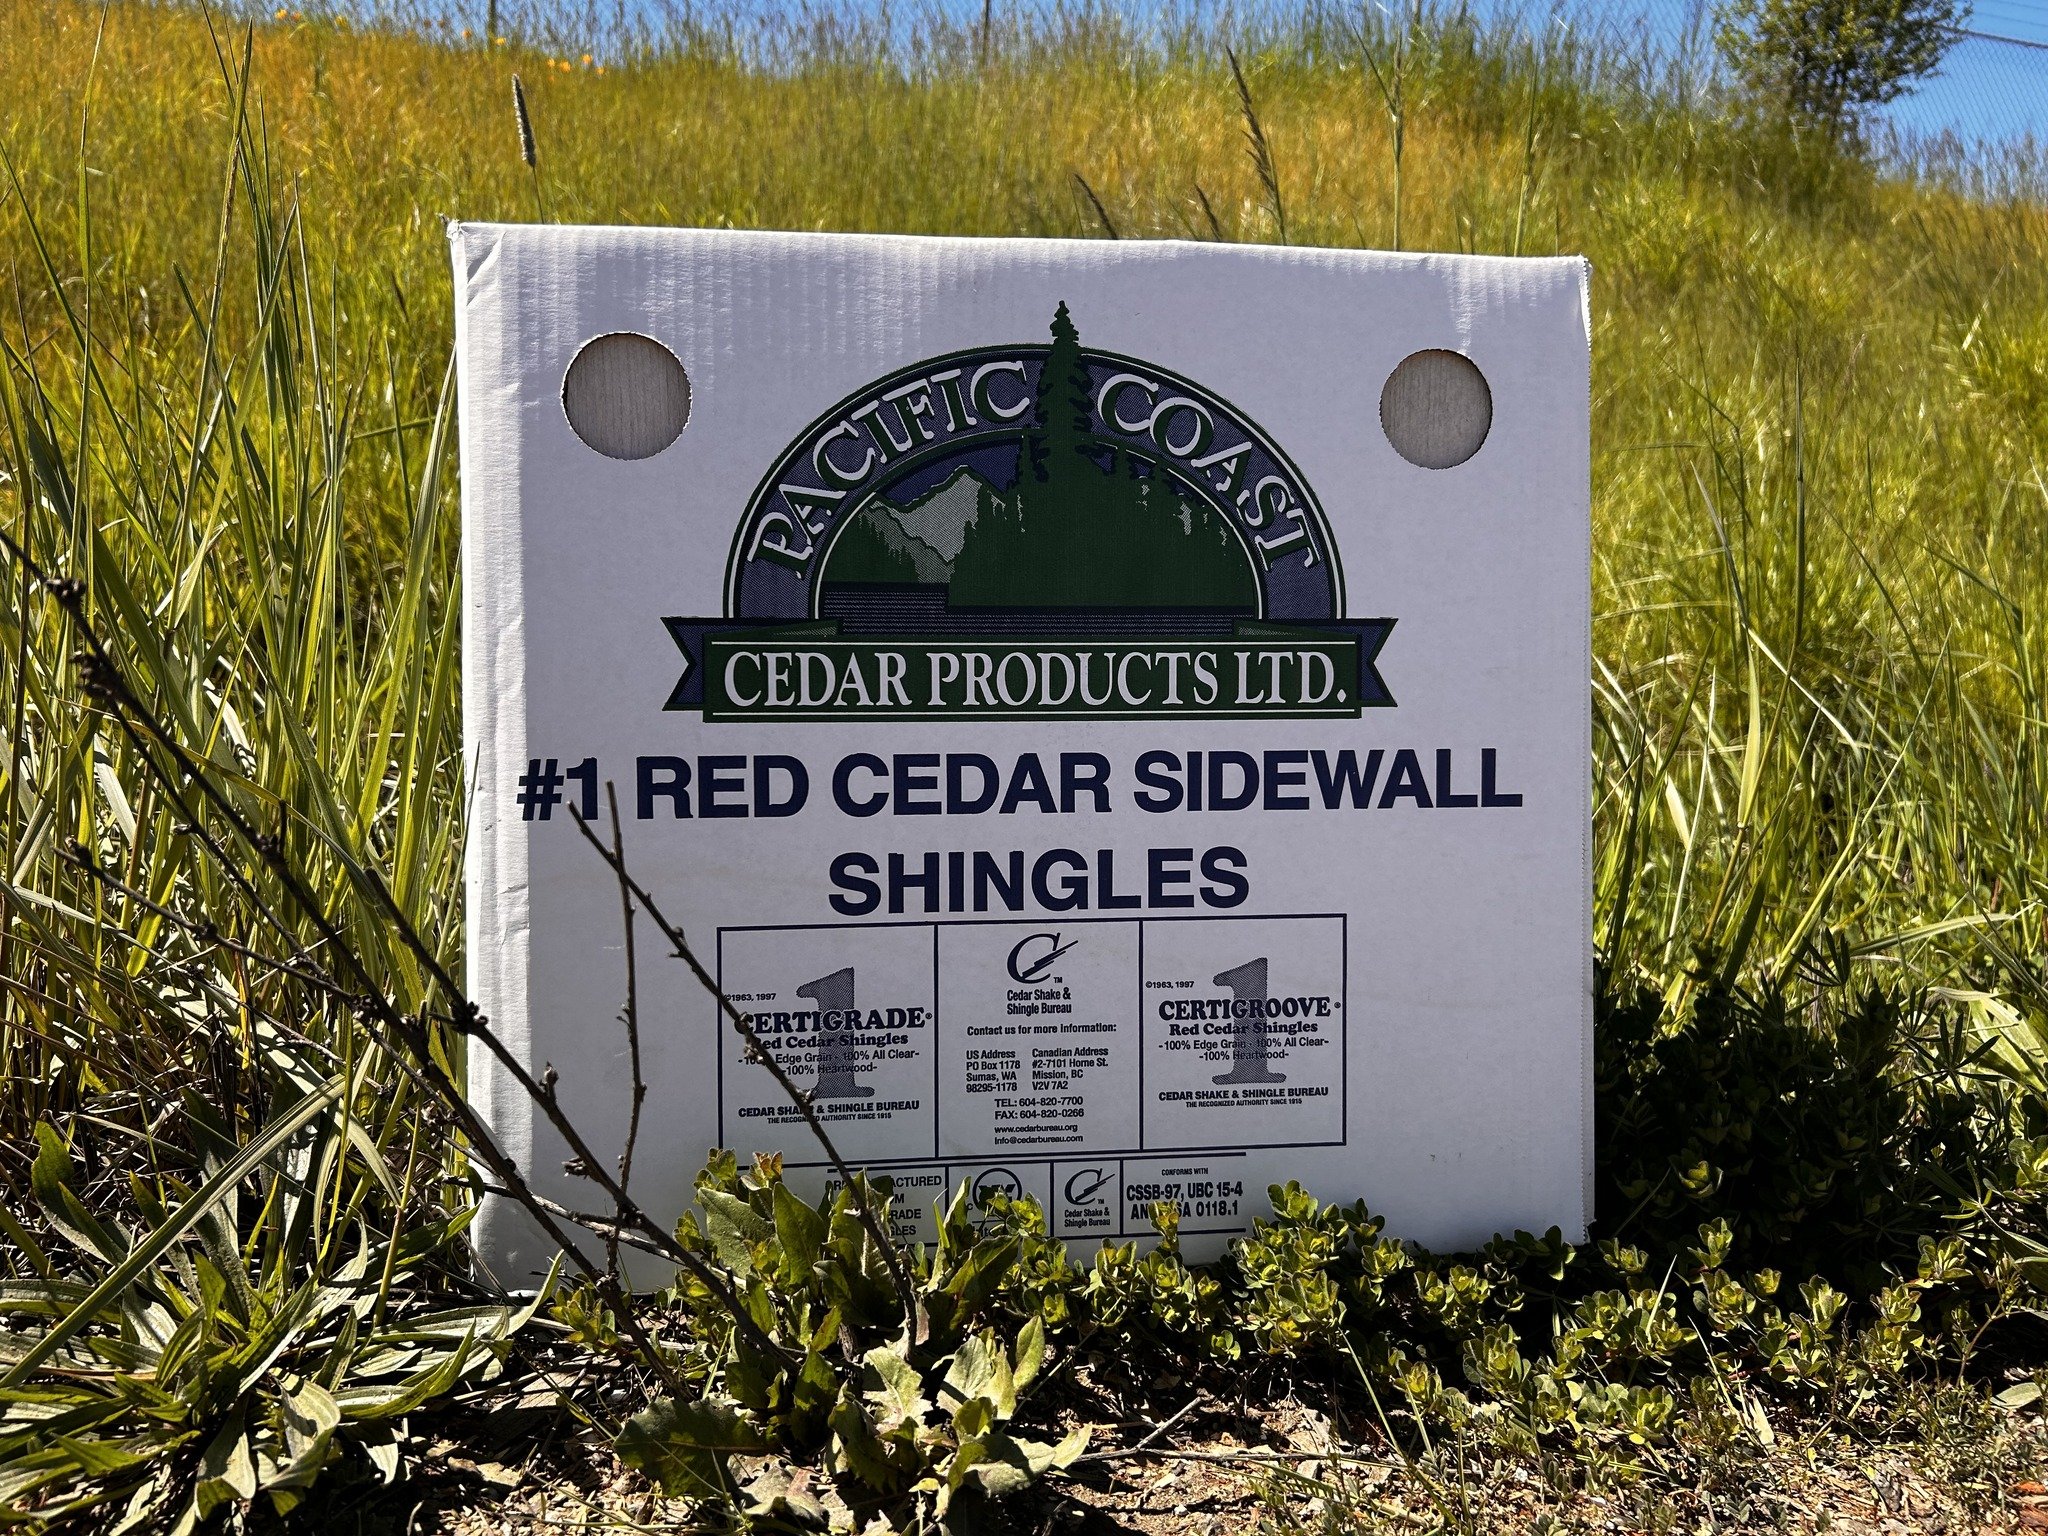 Did you know that not all shingles are created equally?

We are proud to carry Pacific Coast Cedar Products R&amp;R Shingles! We have compared these to other mills such as Miller and Teal and every single time, these hands down have unmatched quality